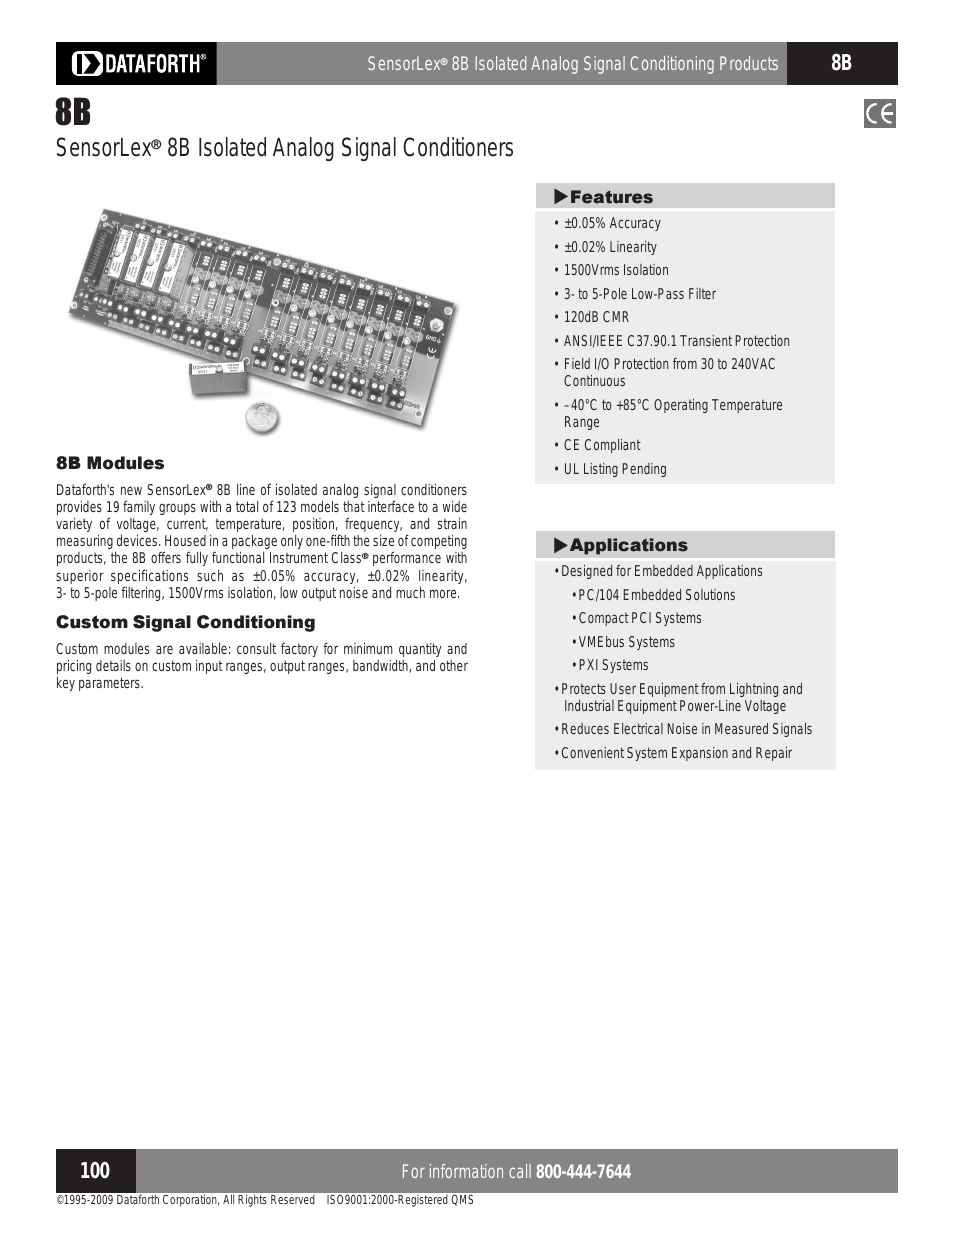 8B Isolated Analog Signal Conditioners